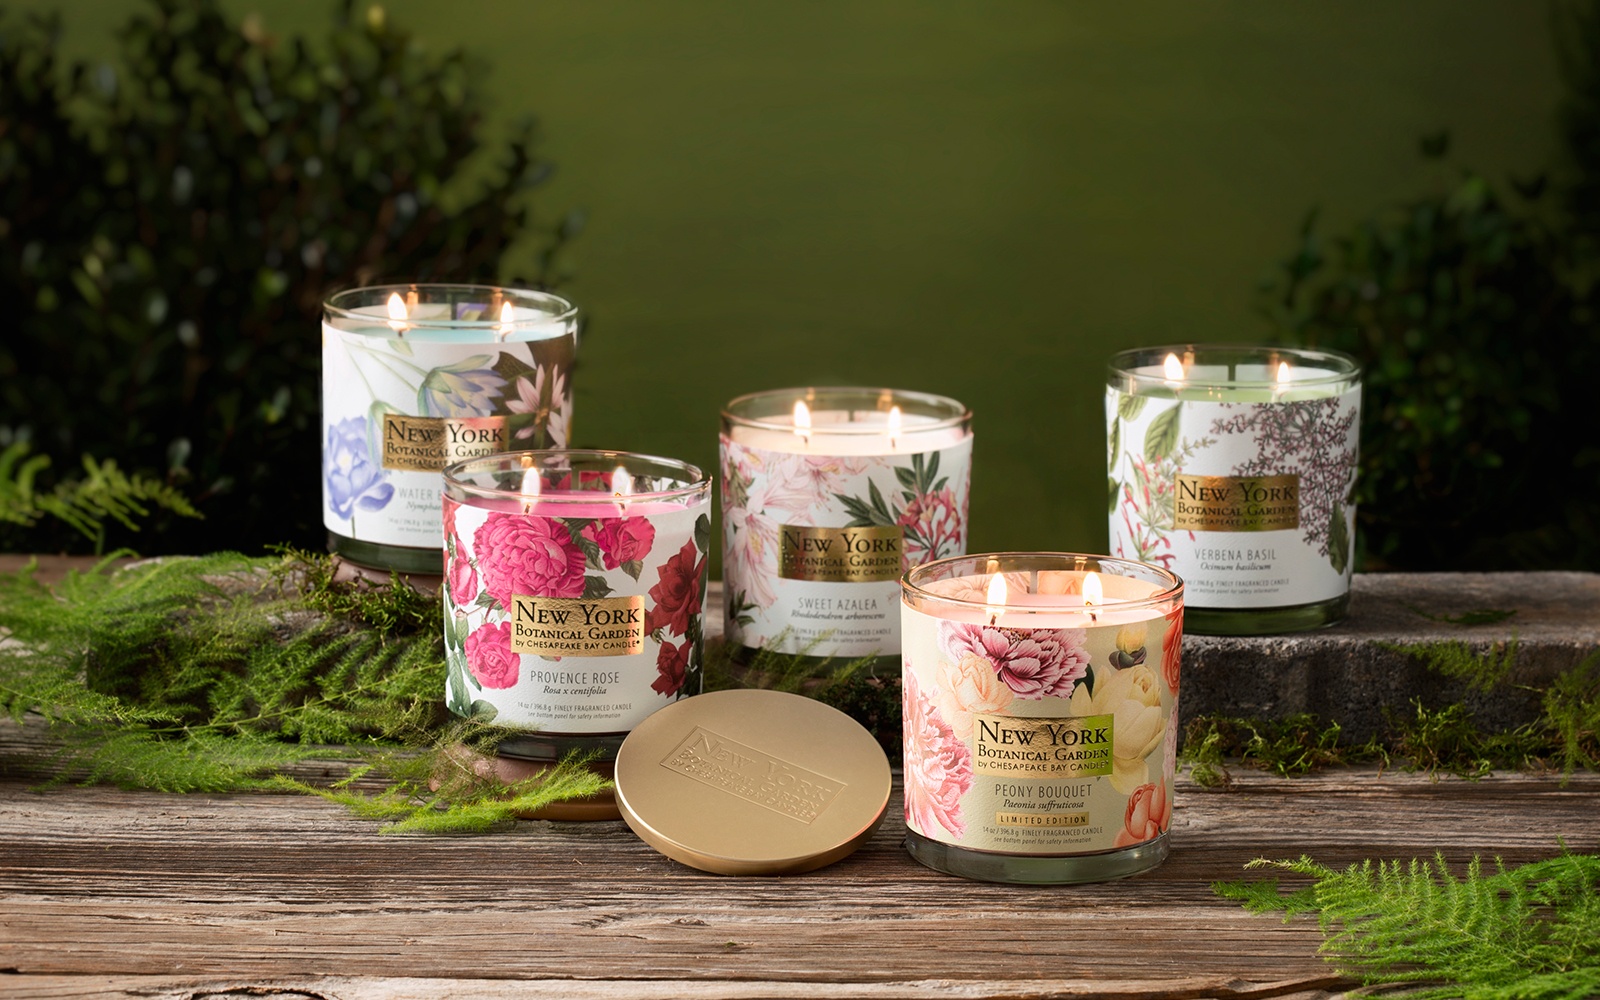 Chesapeake Bay Candle to Launch New York-Inspired Fragrance Line